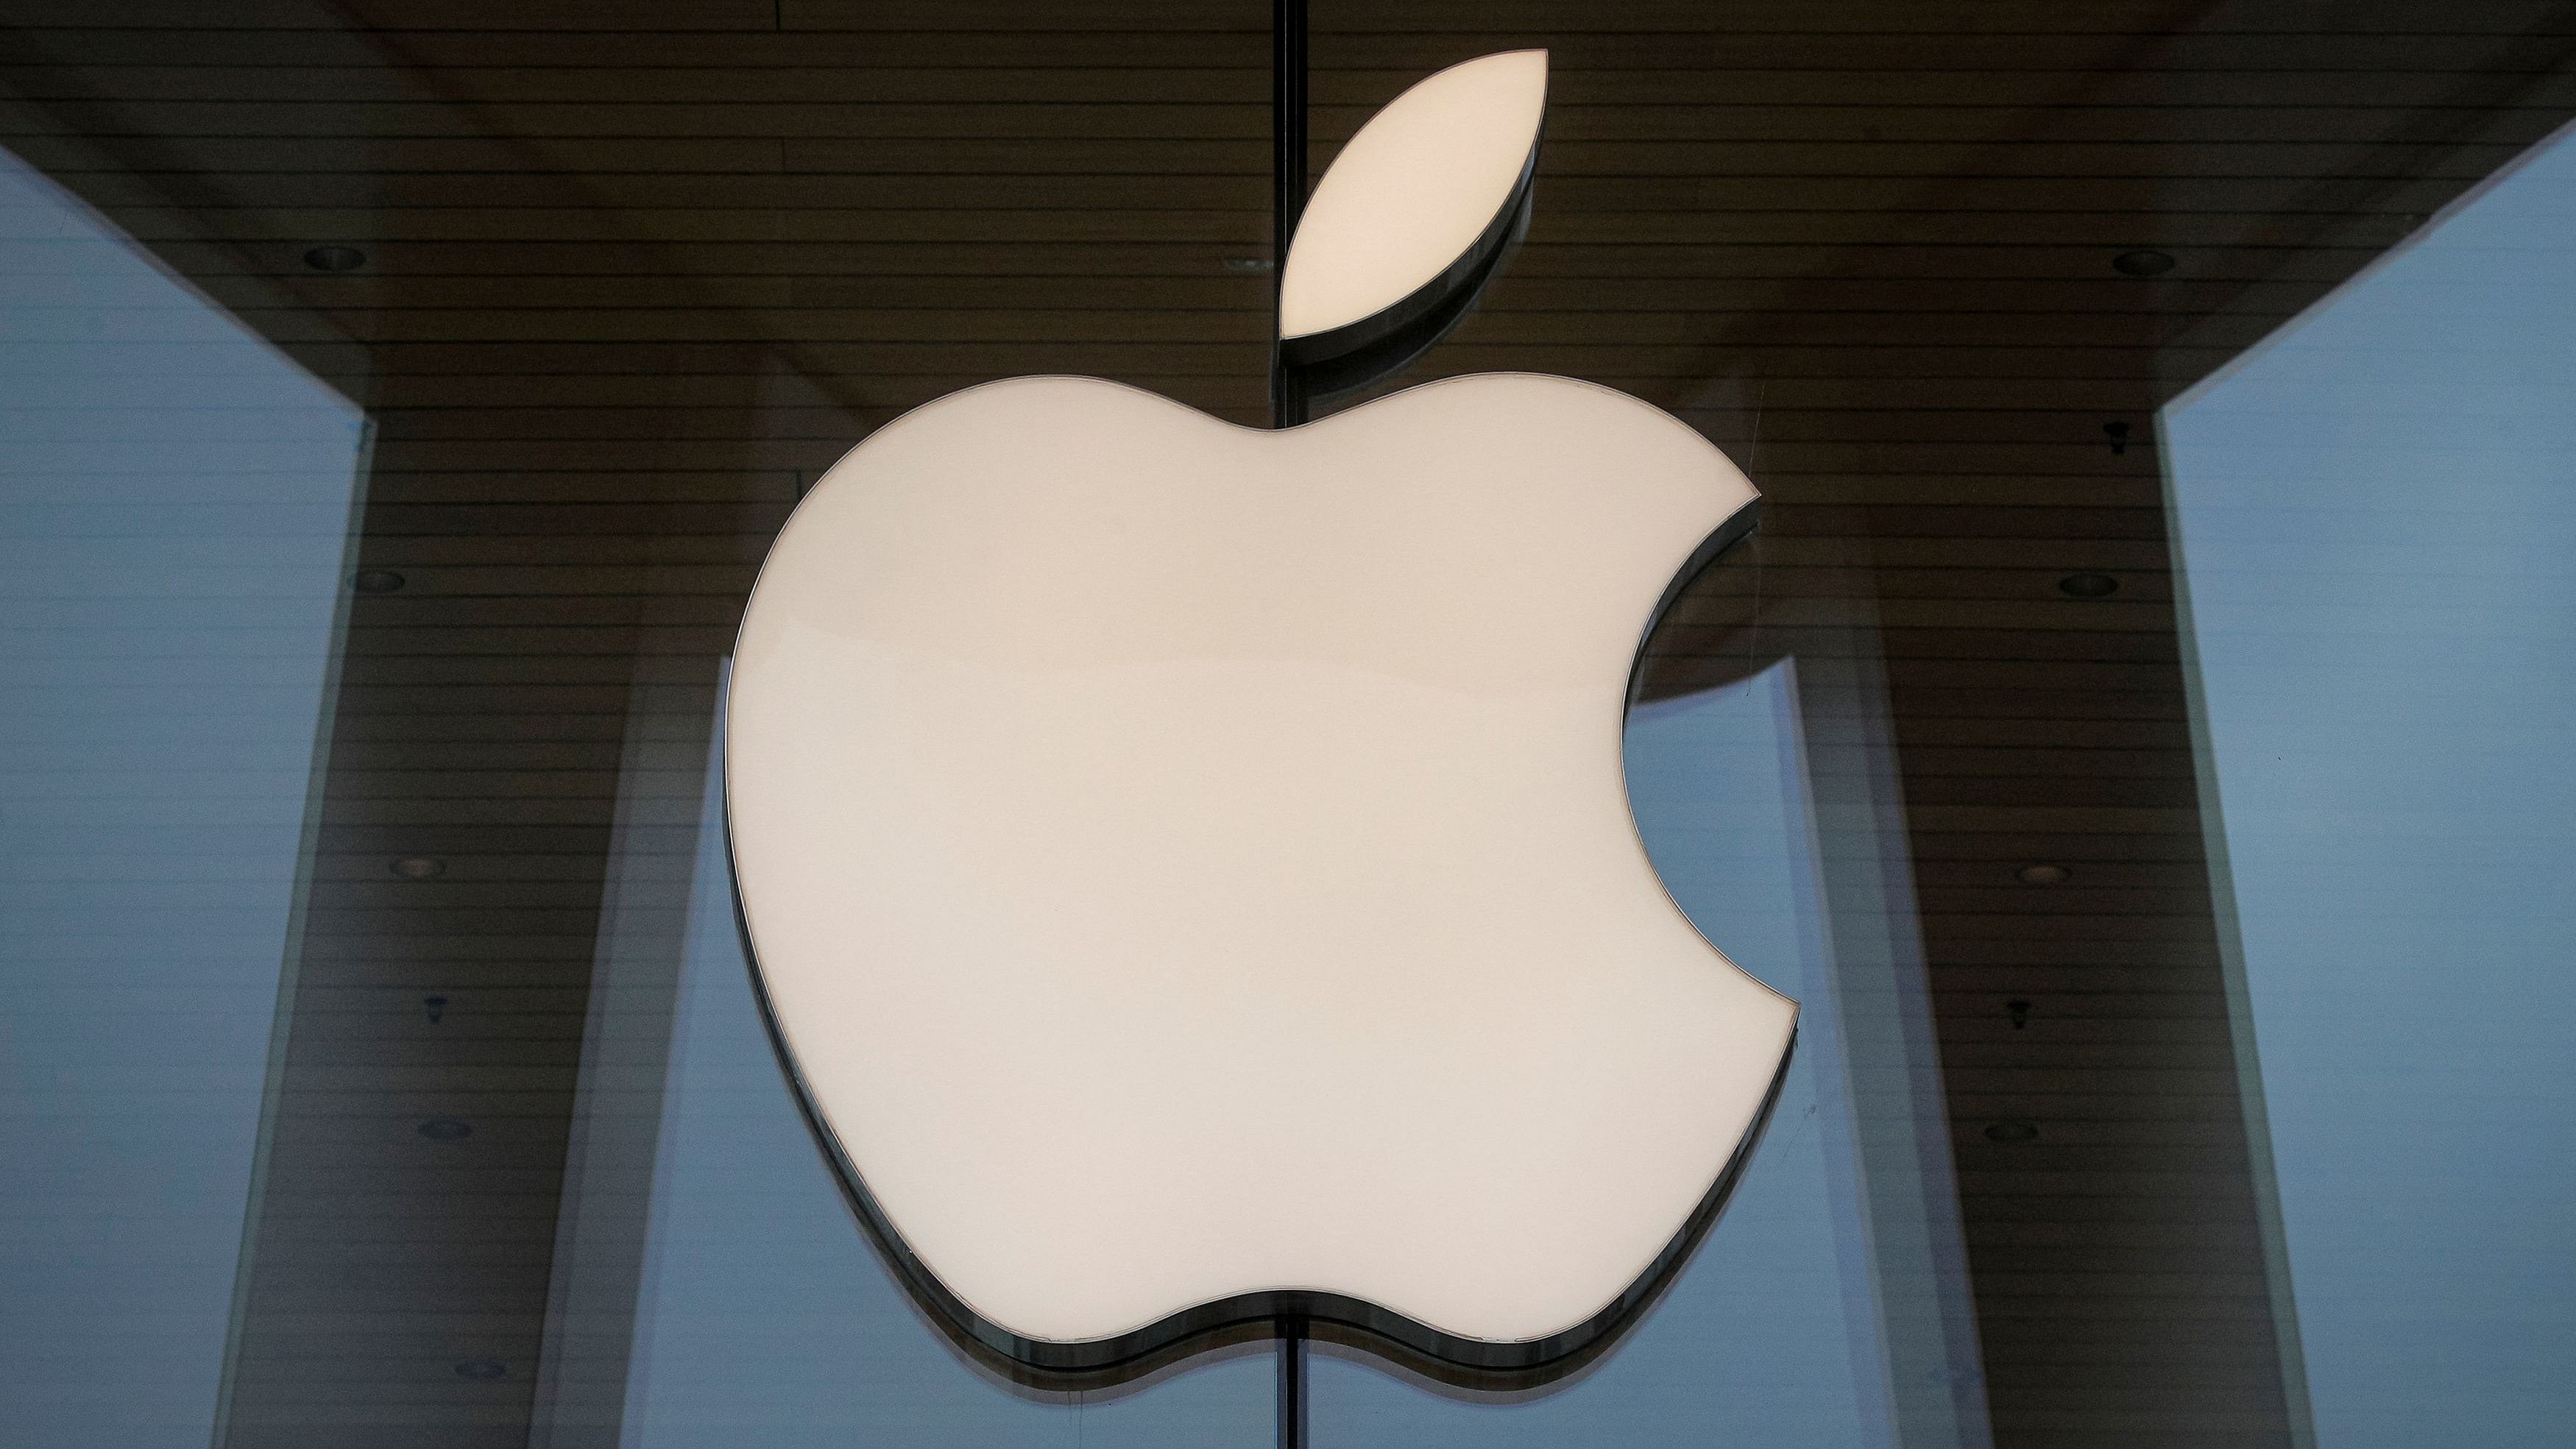 <div class="paragraphs"><p>The Apple logo is seen at an Apple Store. (Representative image)</p></div>